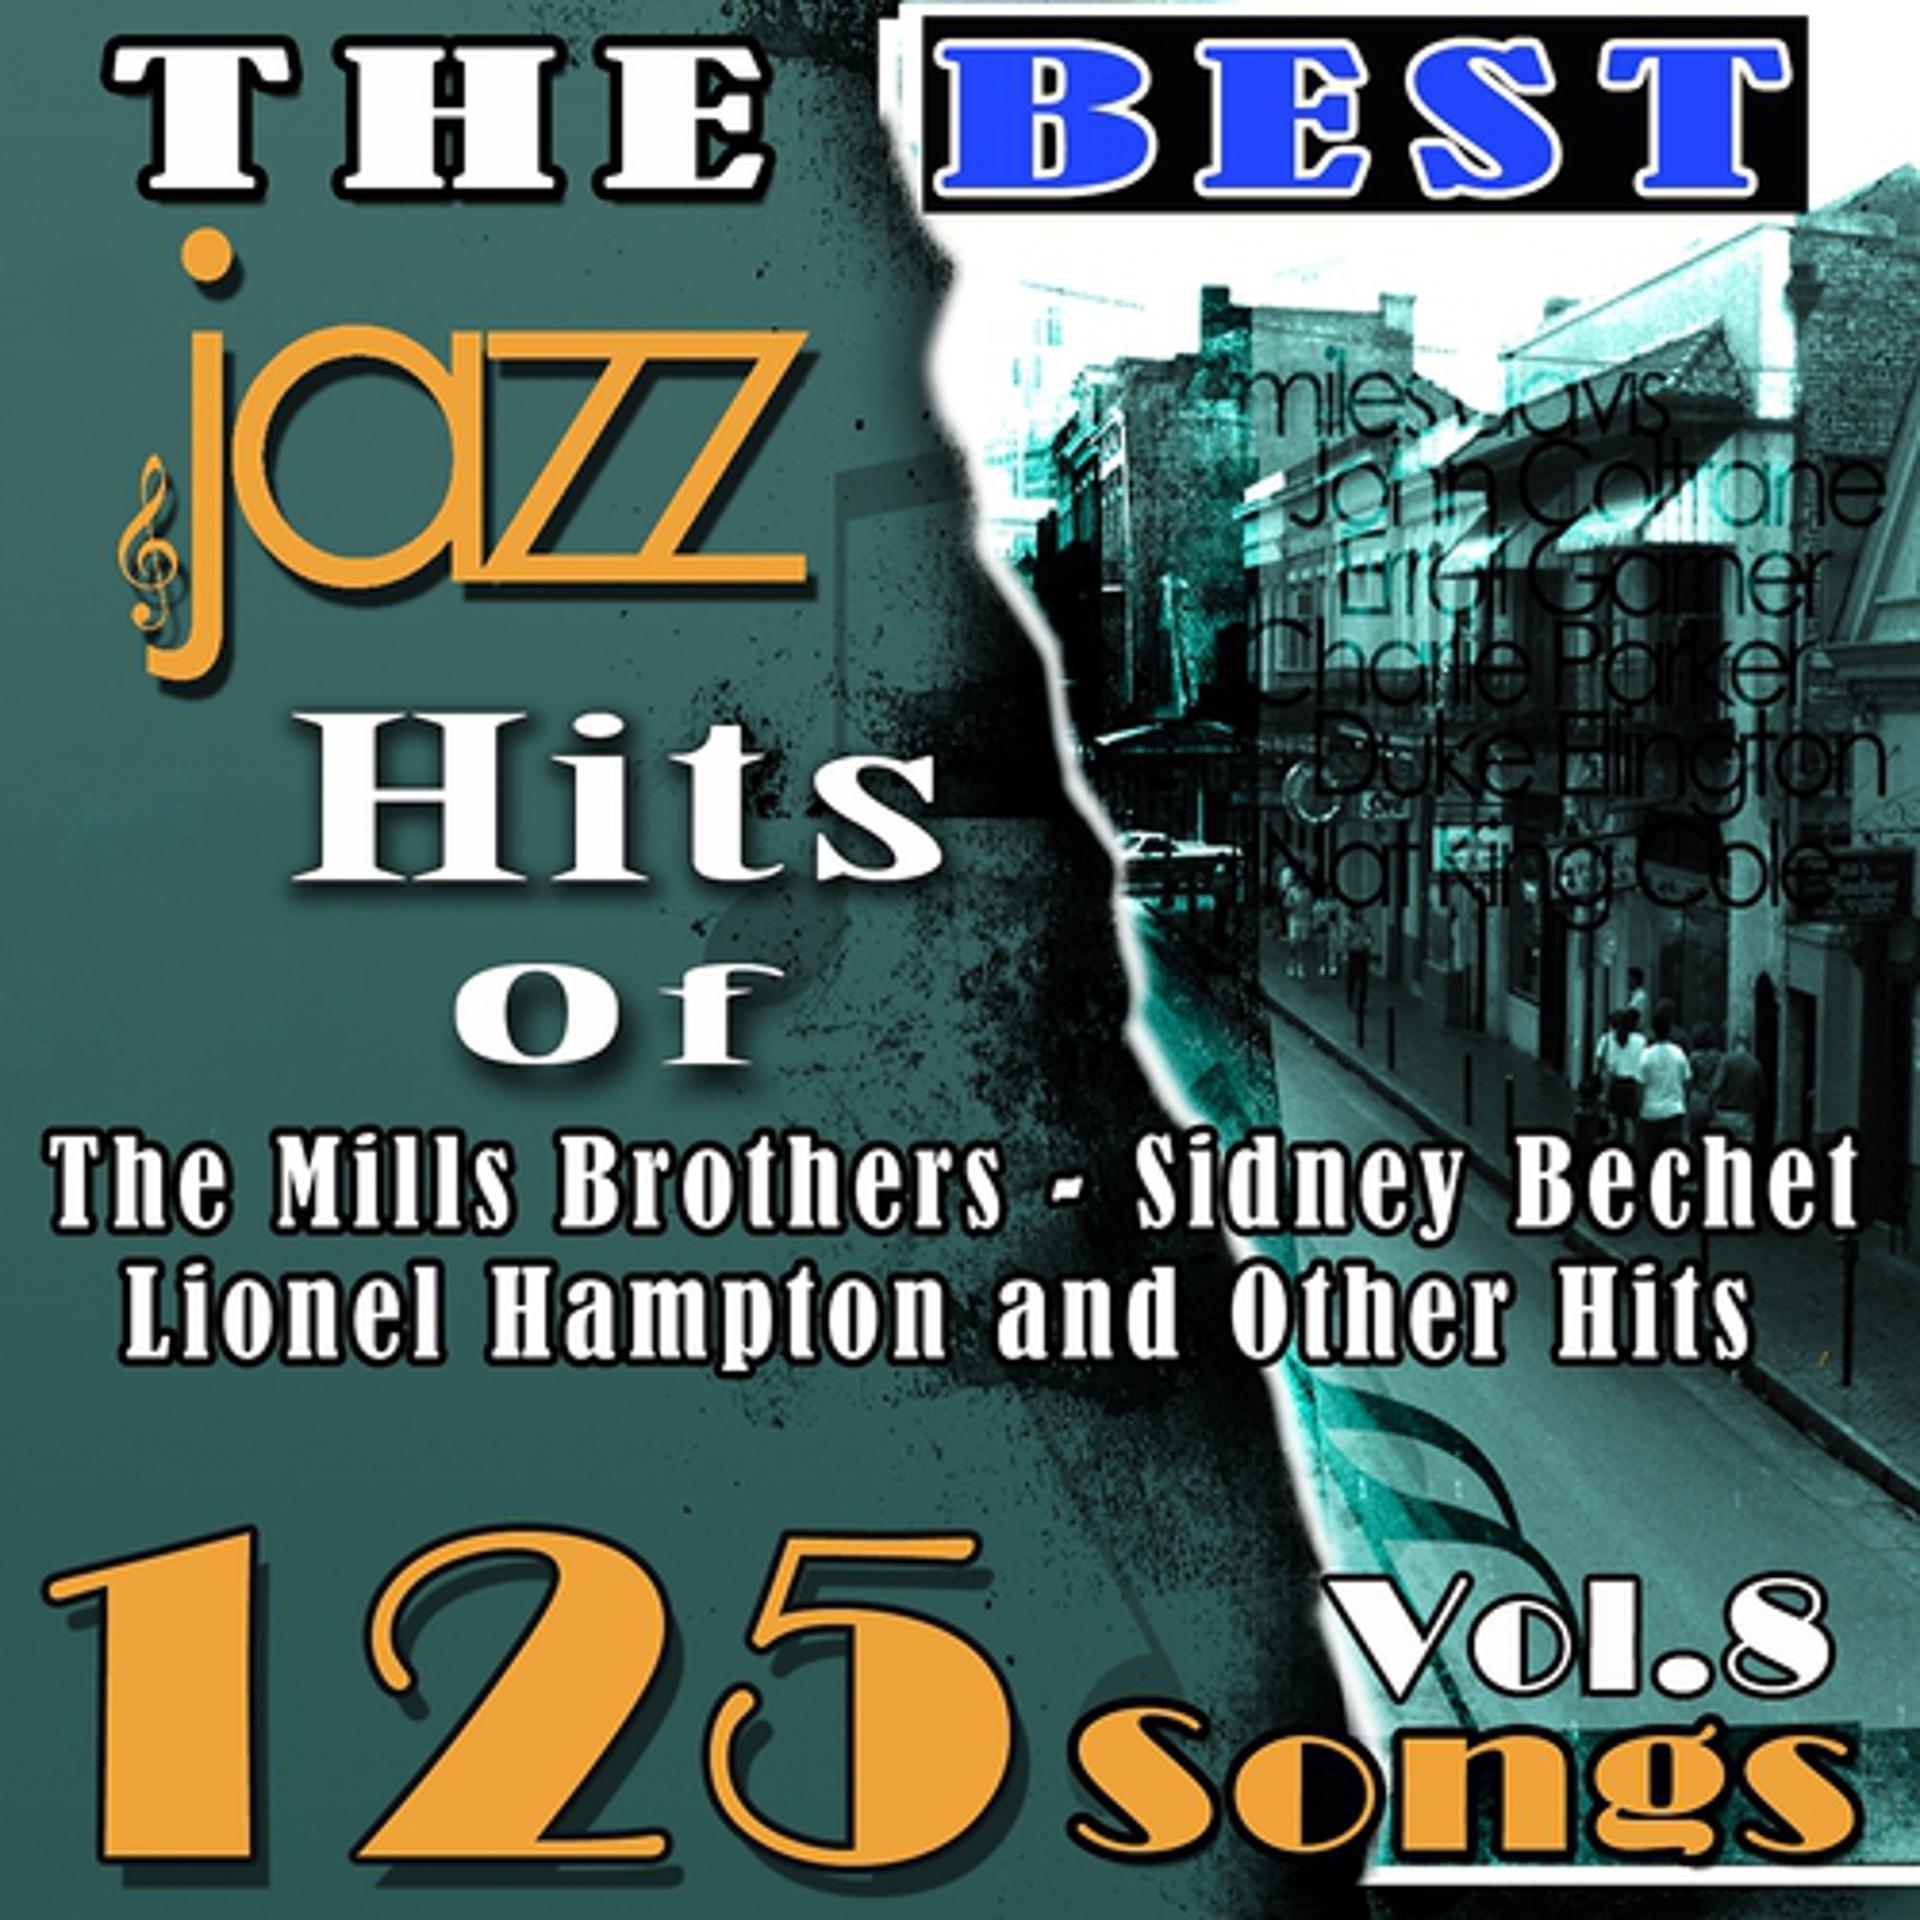 Постер альбома The Best Jazz Hits of The Mills Brothers, Sidney Bechet, Lionel Hampton and Other Hits, Vol. 8